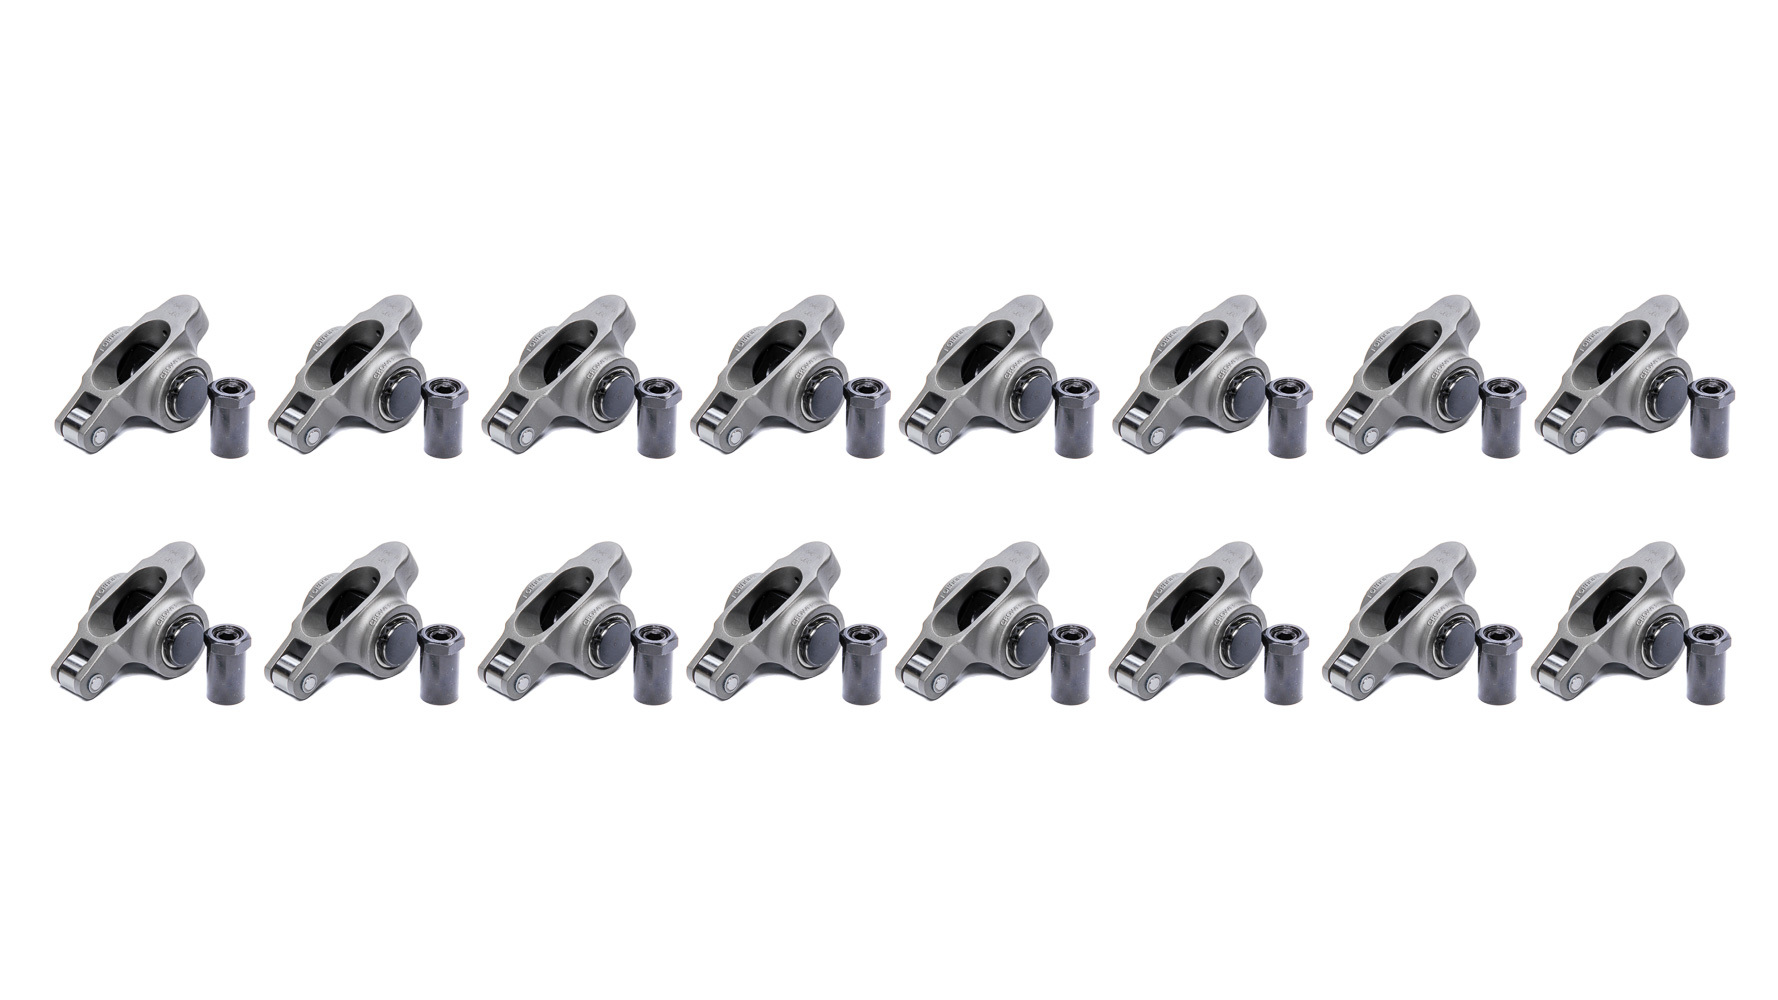 Crower Cams 73612-16 Rocker Arm, 7/16 in Stud Mount, 1.60 Ratio, Full Roller, Stainless, Natural, Small Block Ford, Set of 16